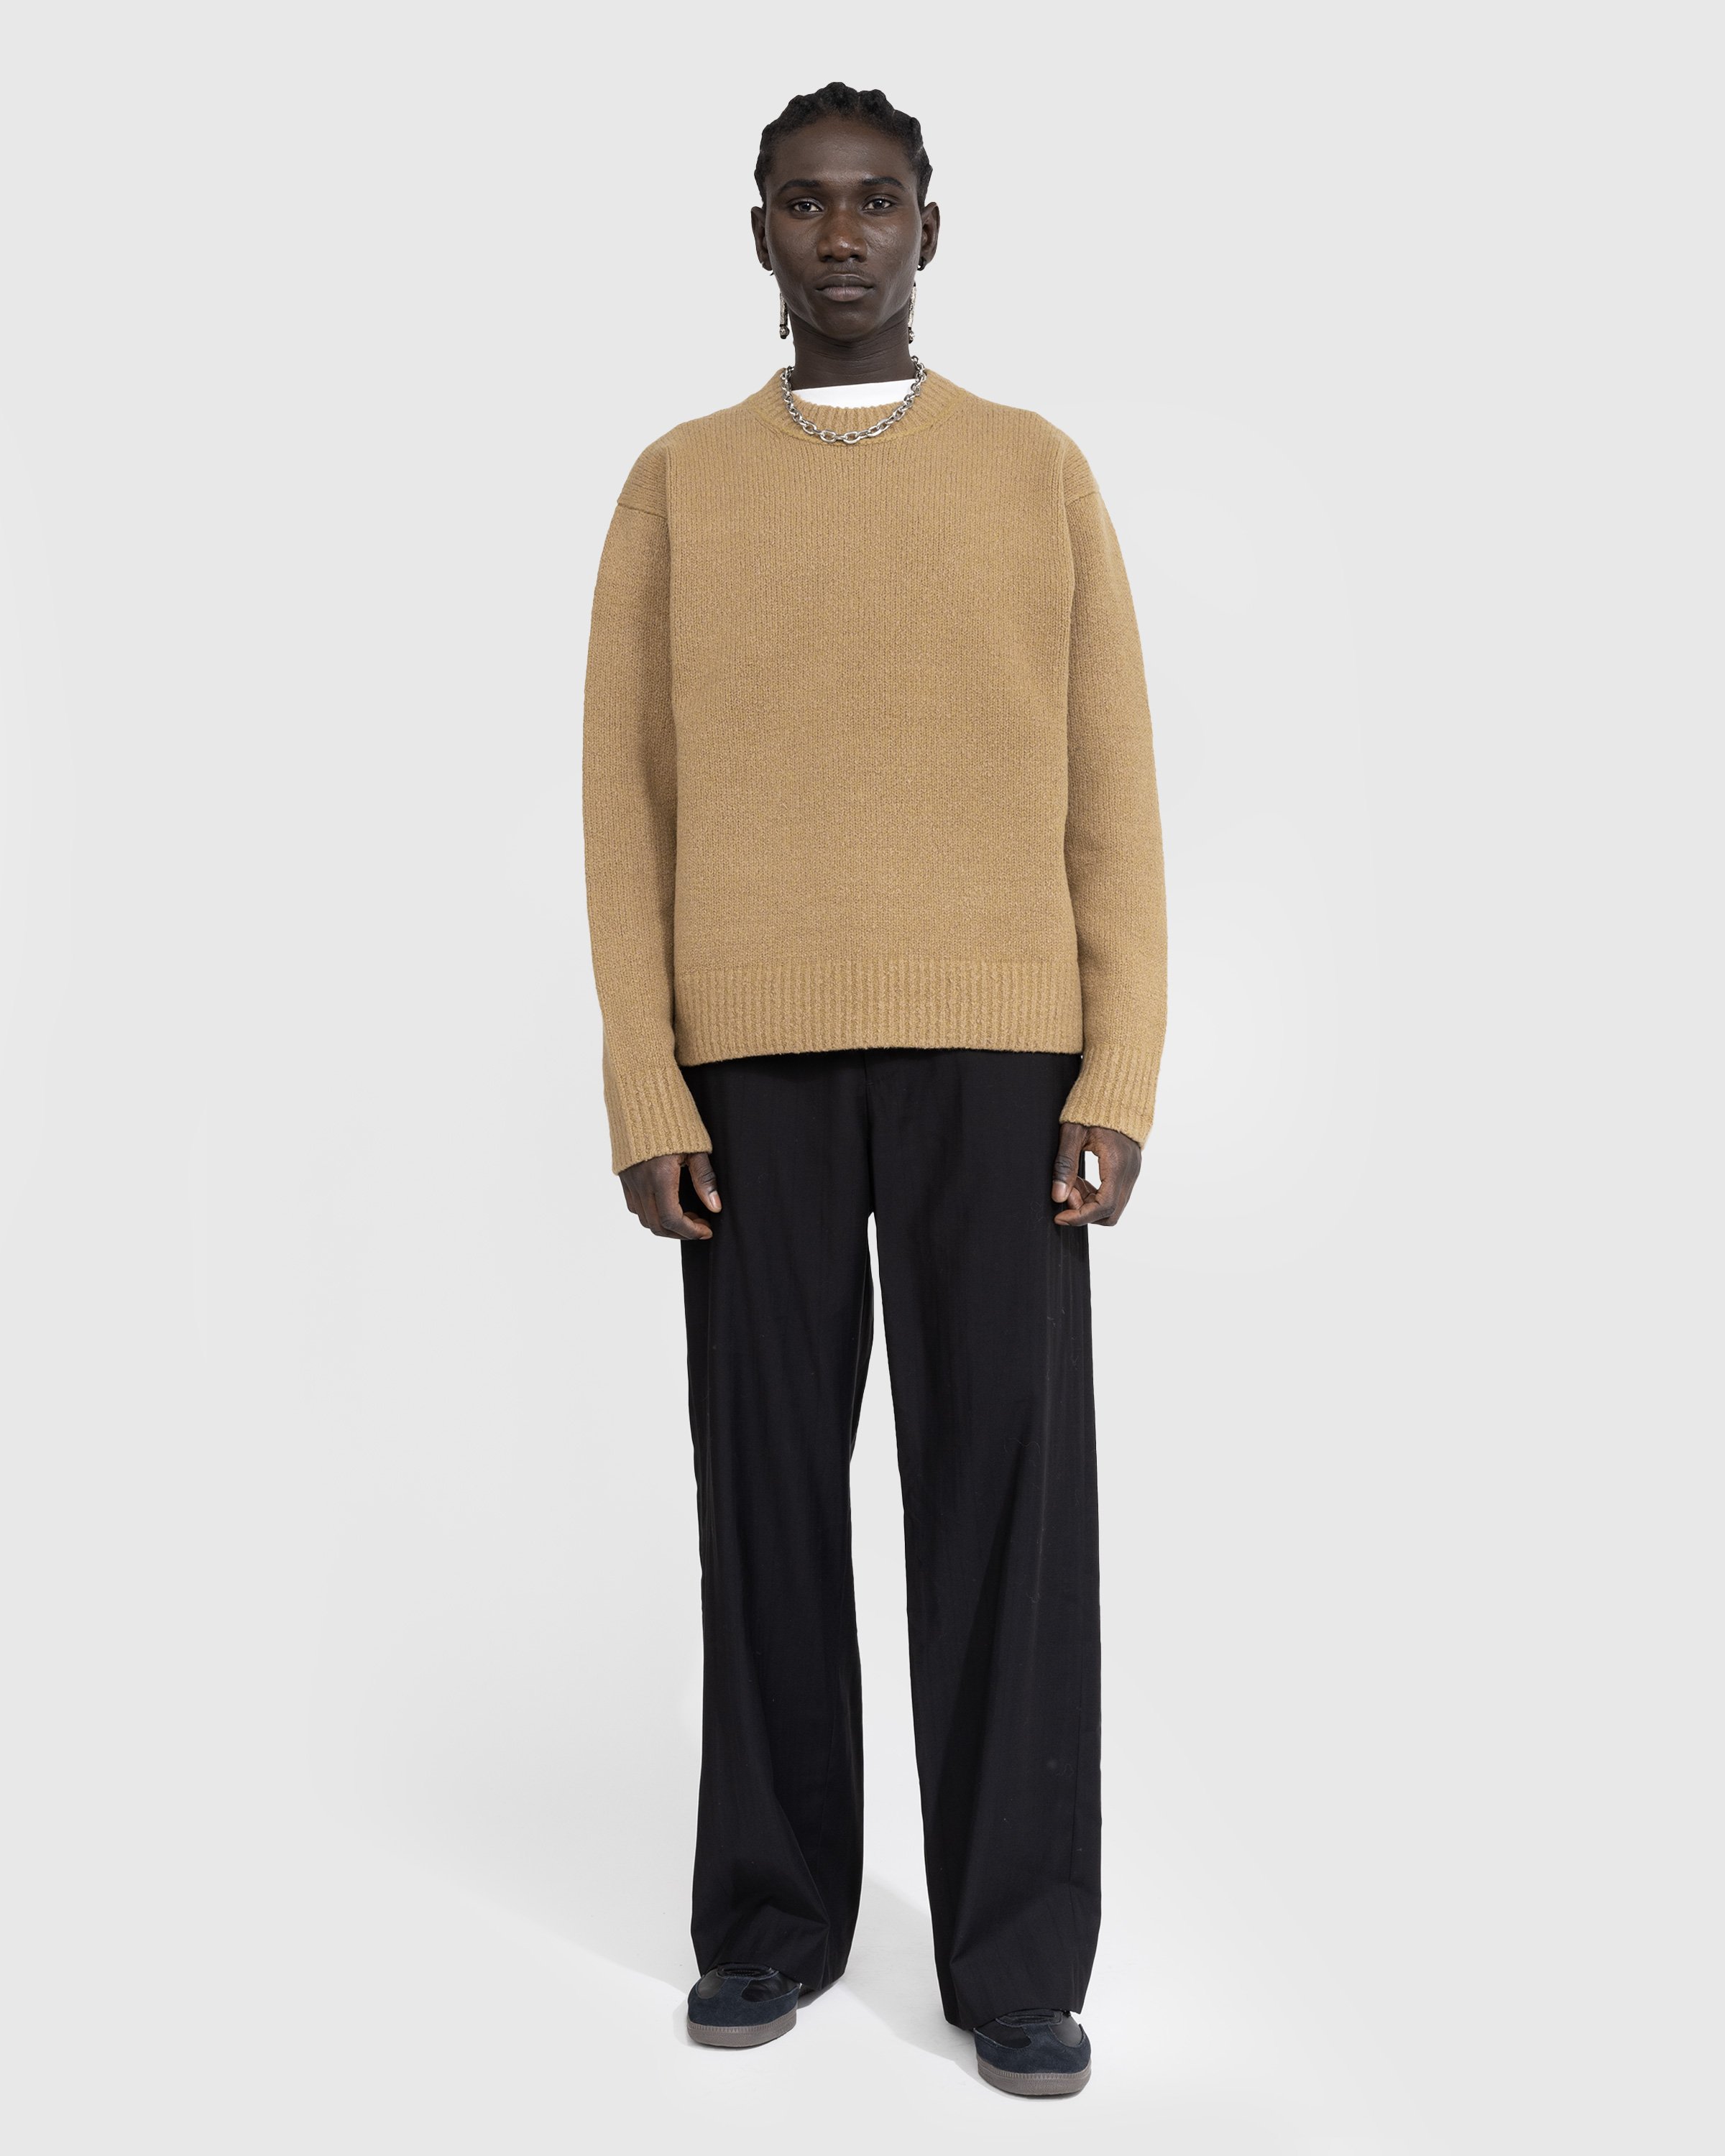 Acne Studios - FN-MN-KNIT000441 - Clothing - Brown - Image 3